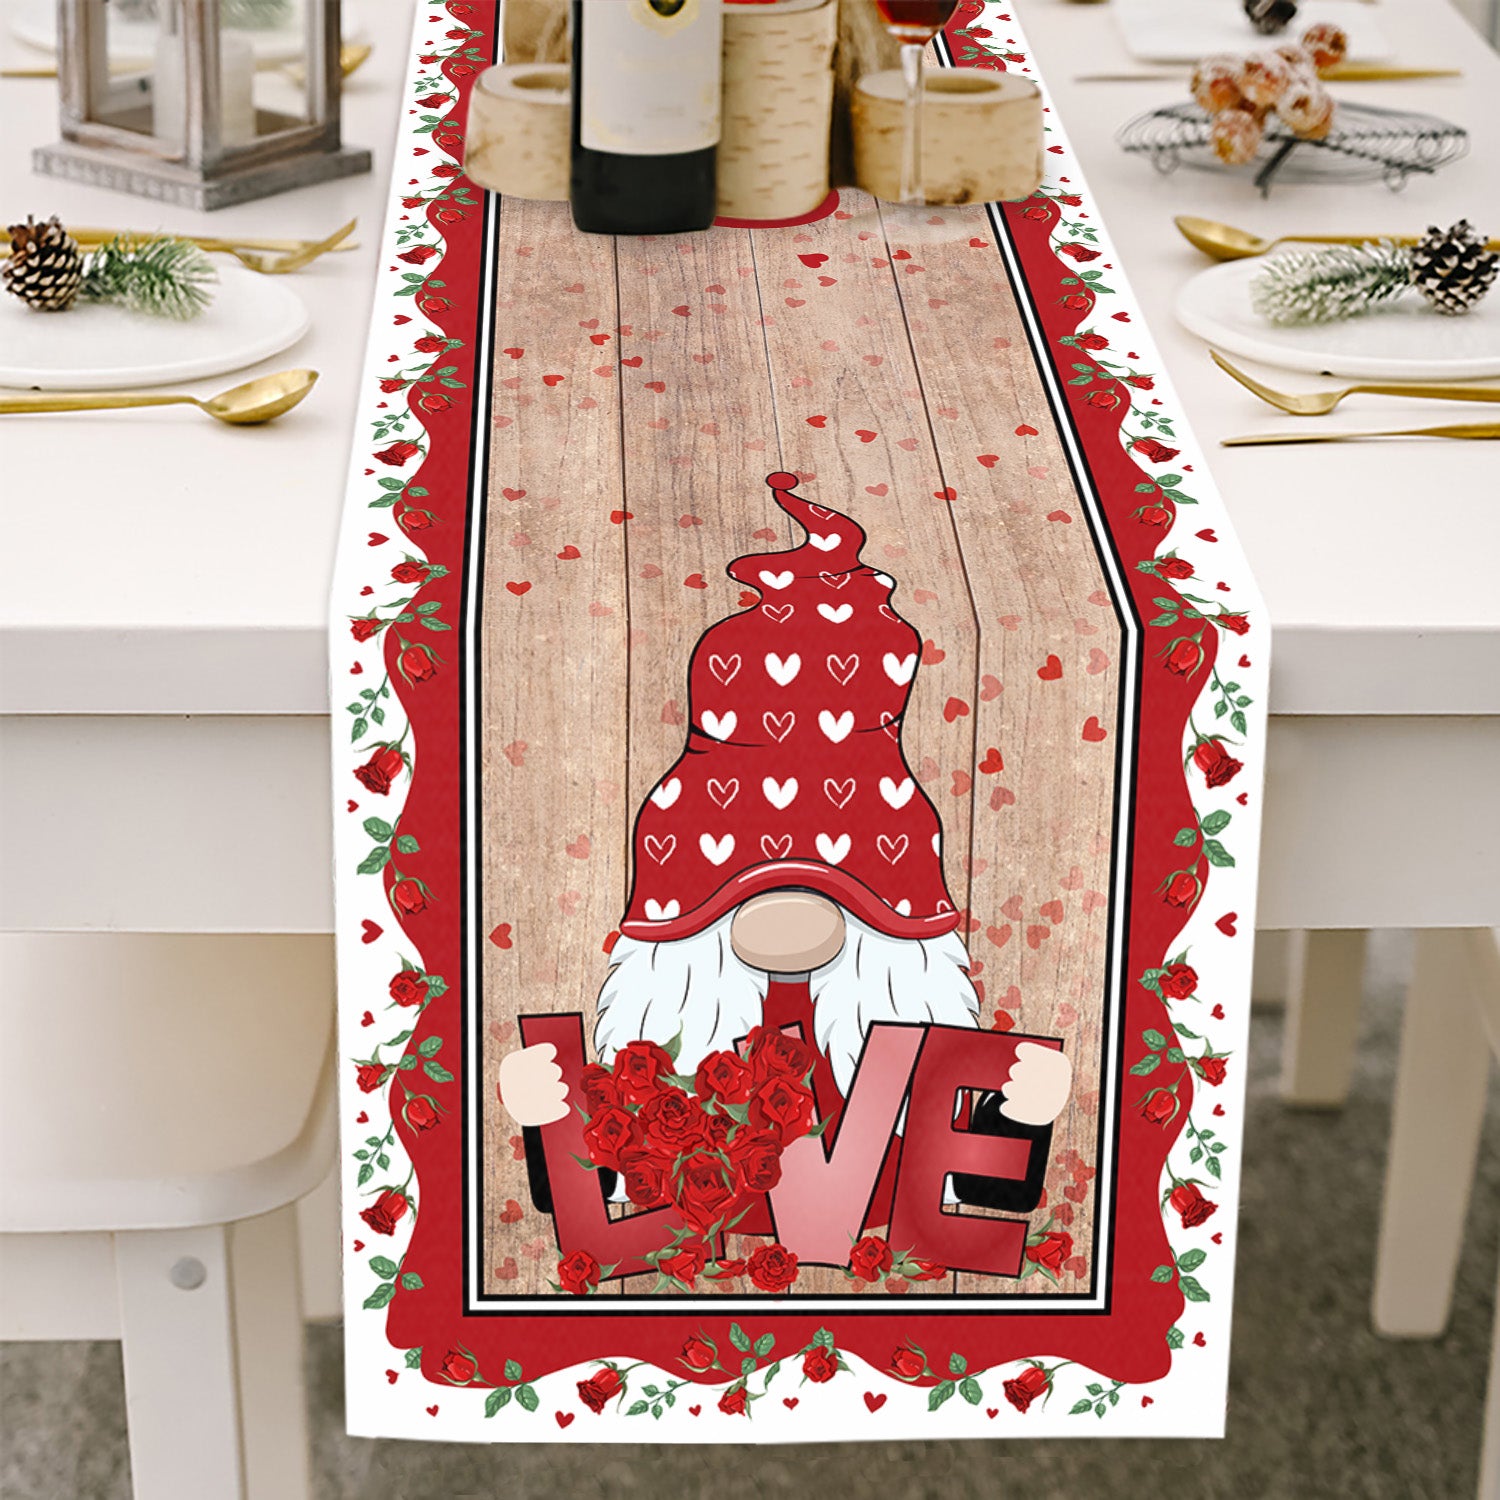 Love & Rose - Gnome Themed Table Runner For Valentine's Day